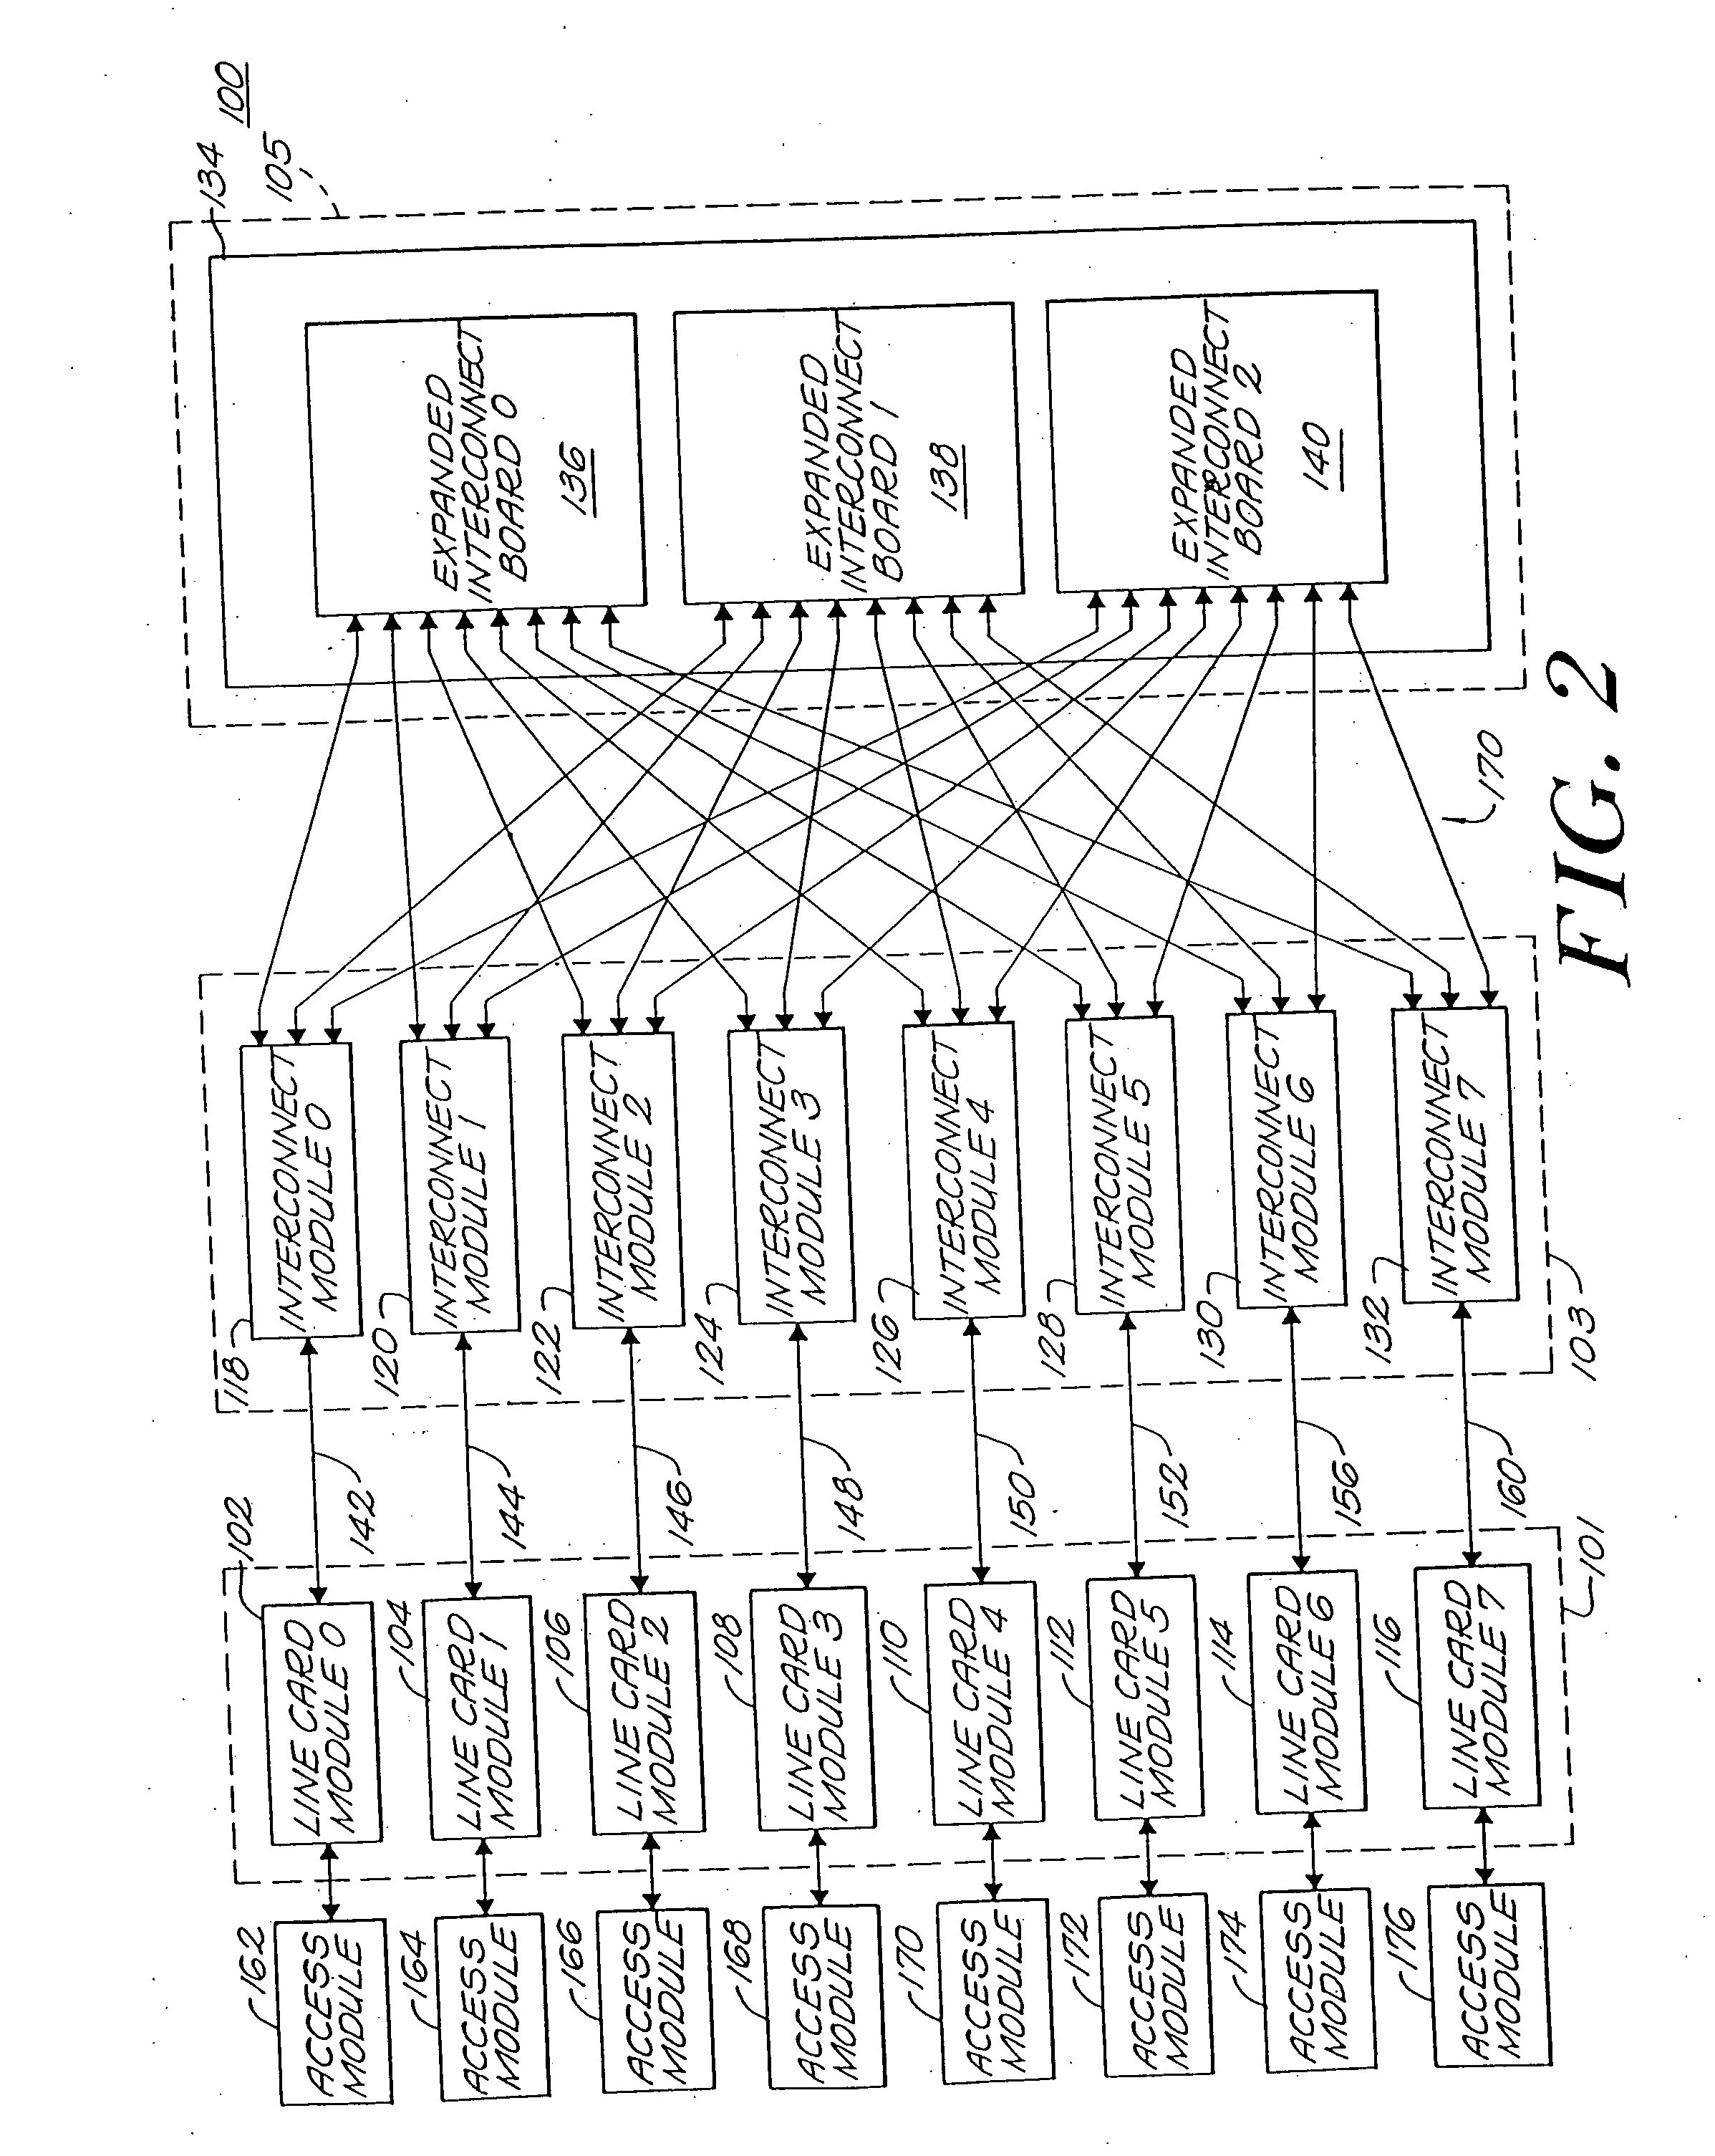 Interconnect network for operation within a communication node